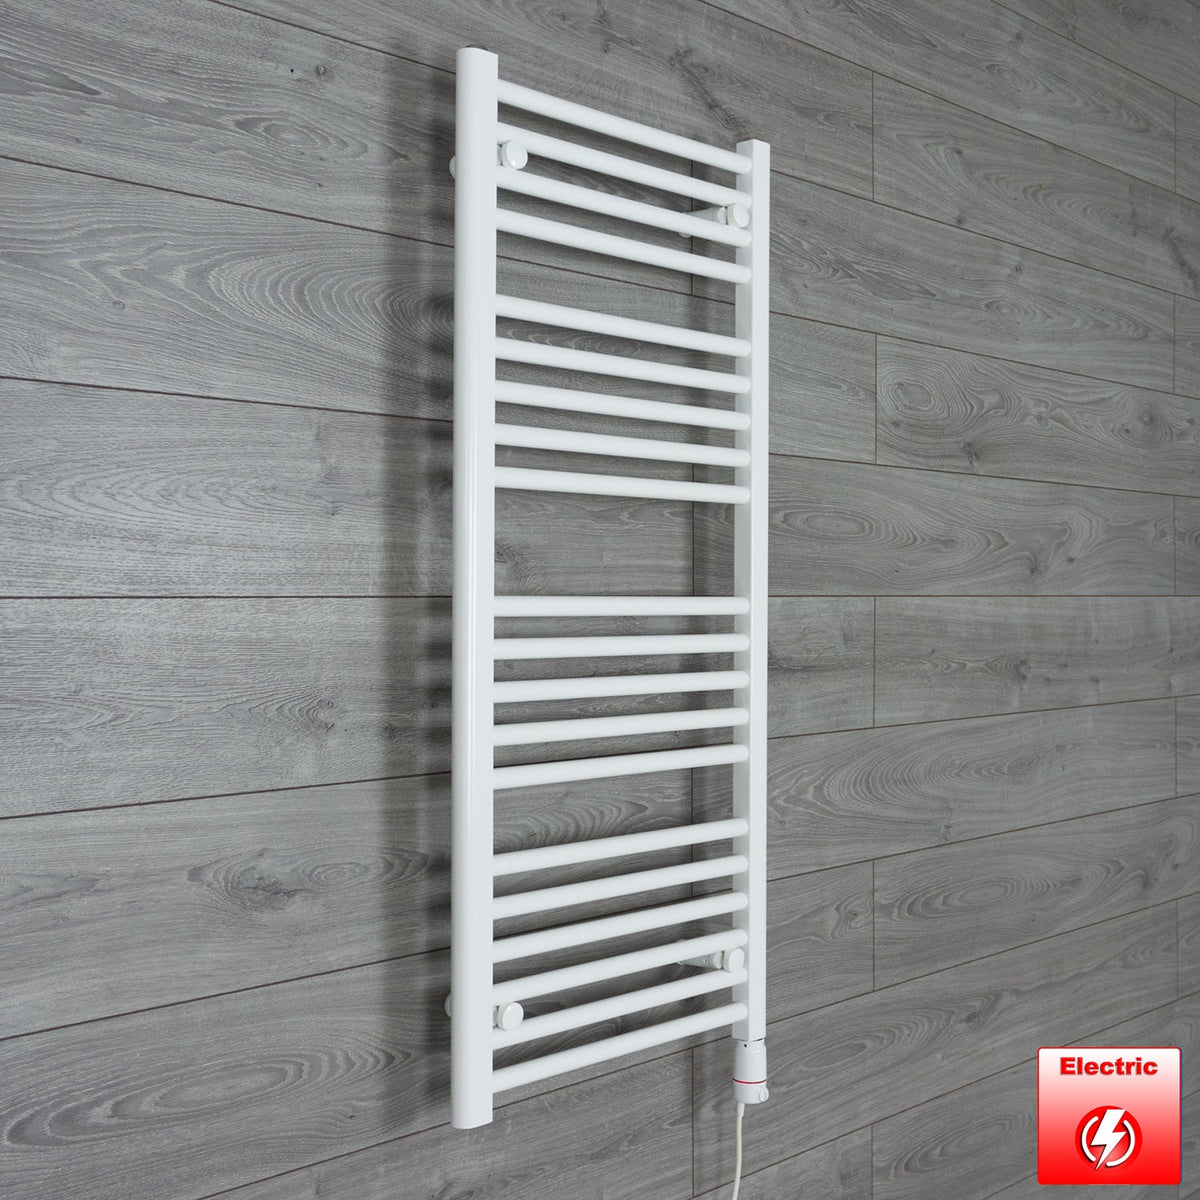 600mm Wide 1100mm High Pre-Filled White Electric Towel Rail Radiator With Thermostatic GT Element